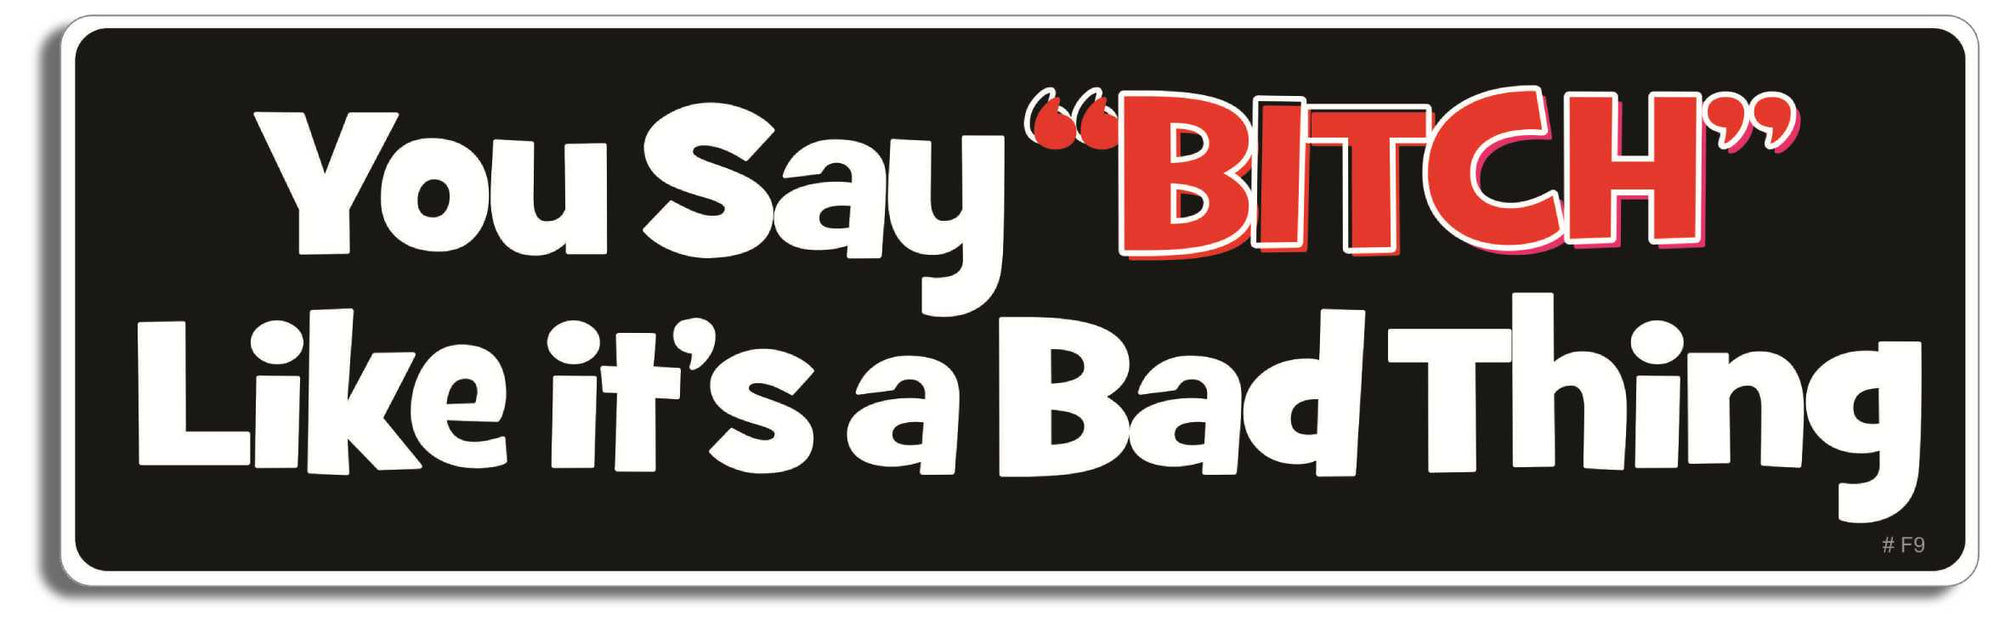 You say "Bitch" like it's a bad thing - 3" x 10" Bumper Sticker--Car Magnet- -  Decal Bumper Sticker-funny Bumper Sticker Car Magnet You say "Bitch" like it's a bad thing-  Decal for cars funny, funny quote, funny saying